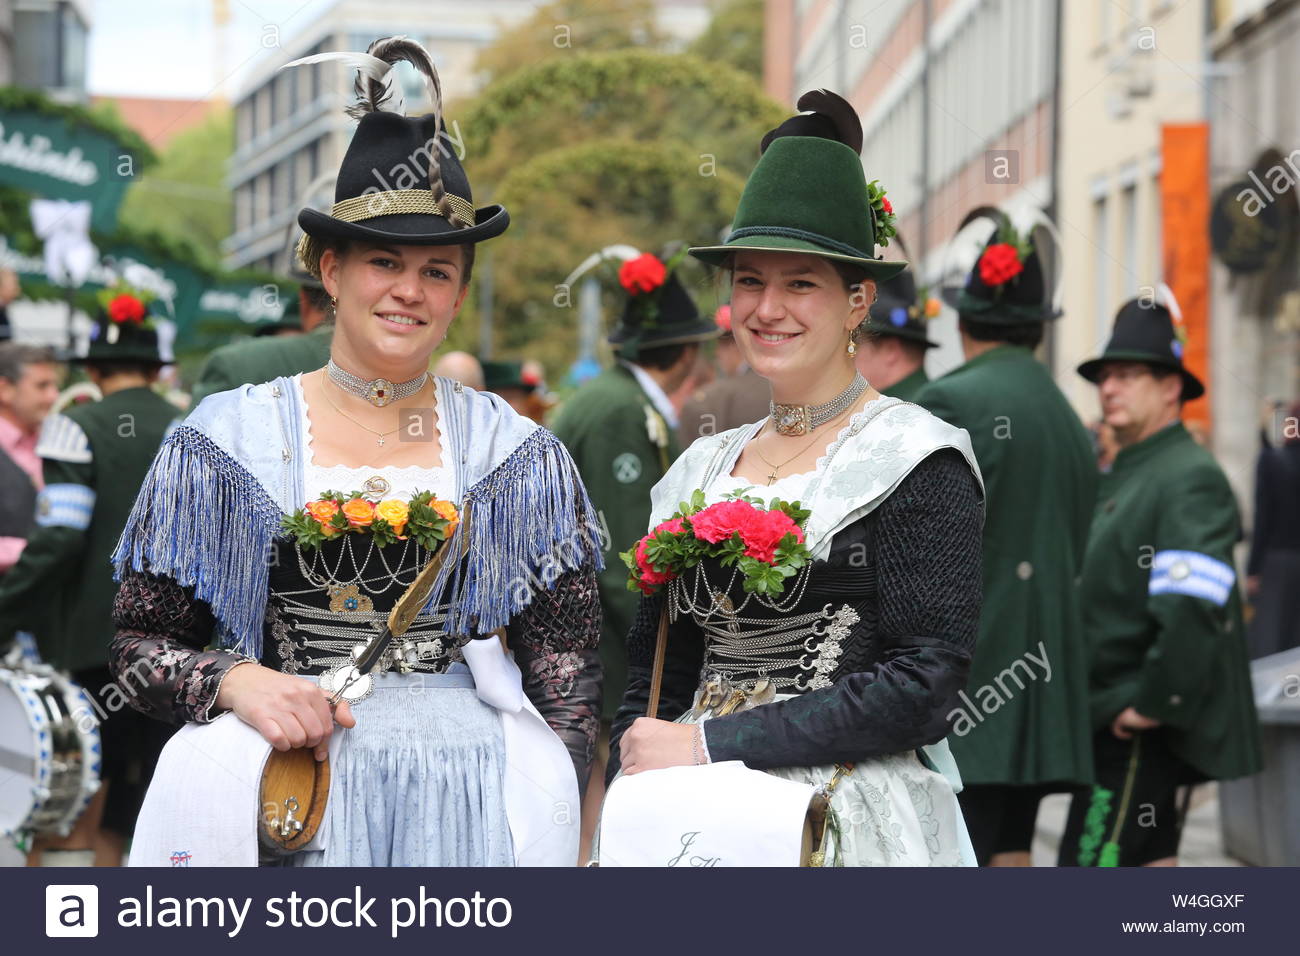 Two ladies in traditional tracht pose for the camera at the start of the Oktoberfest parade in Munich, Germany Stock Photo